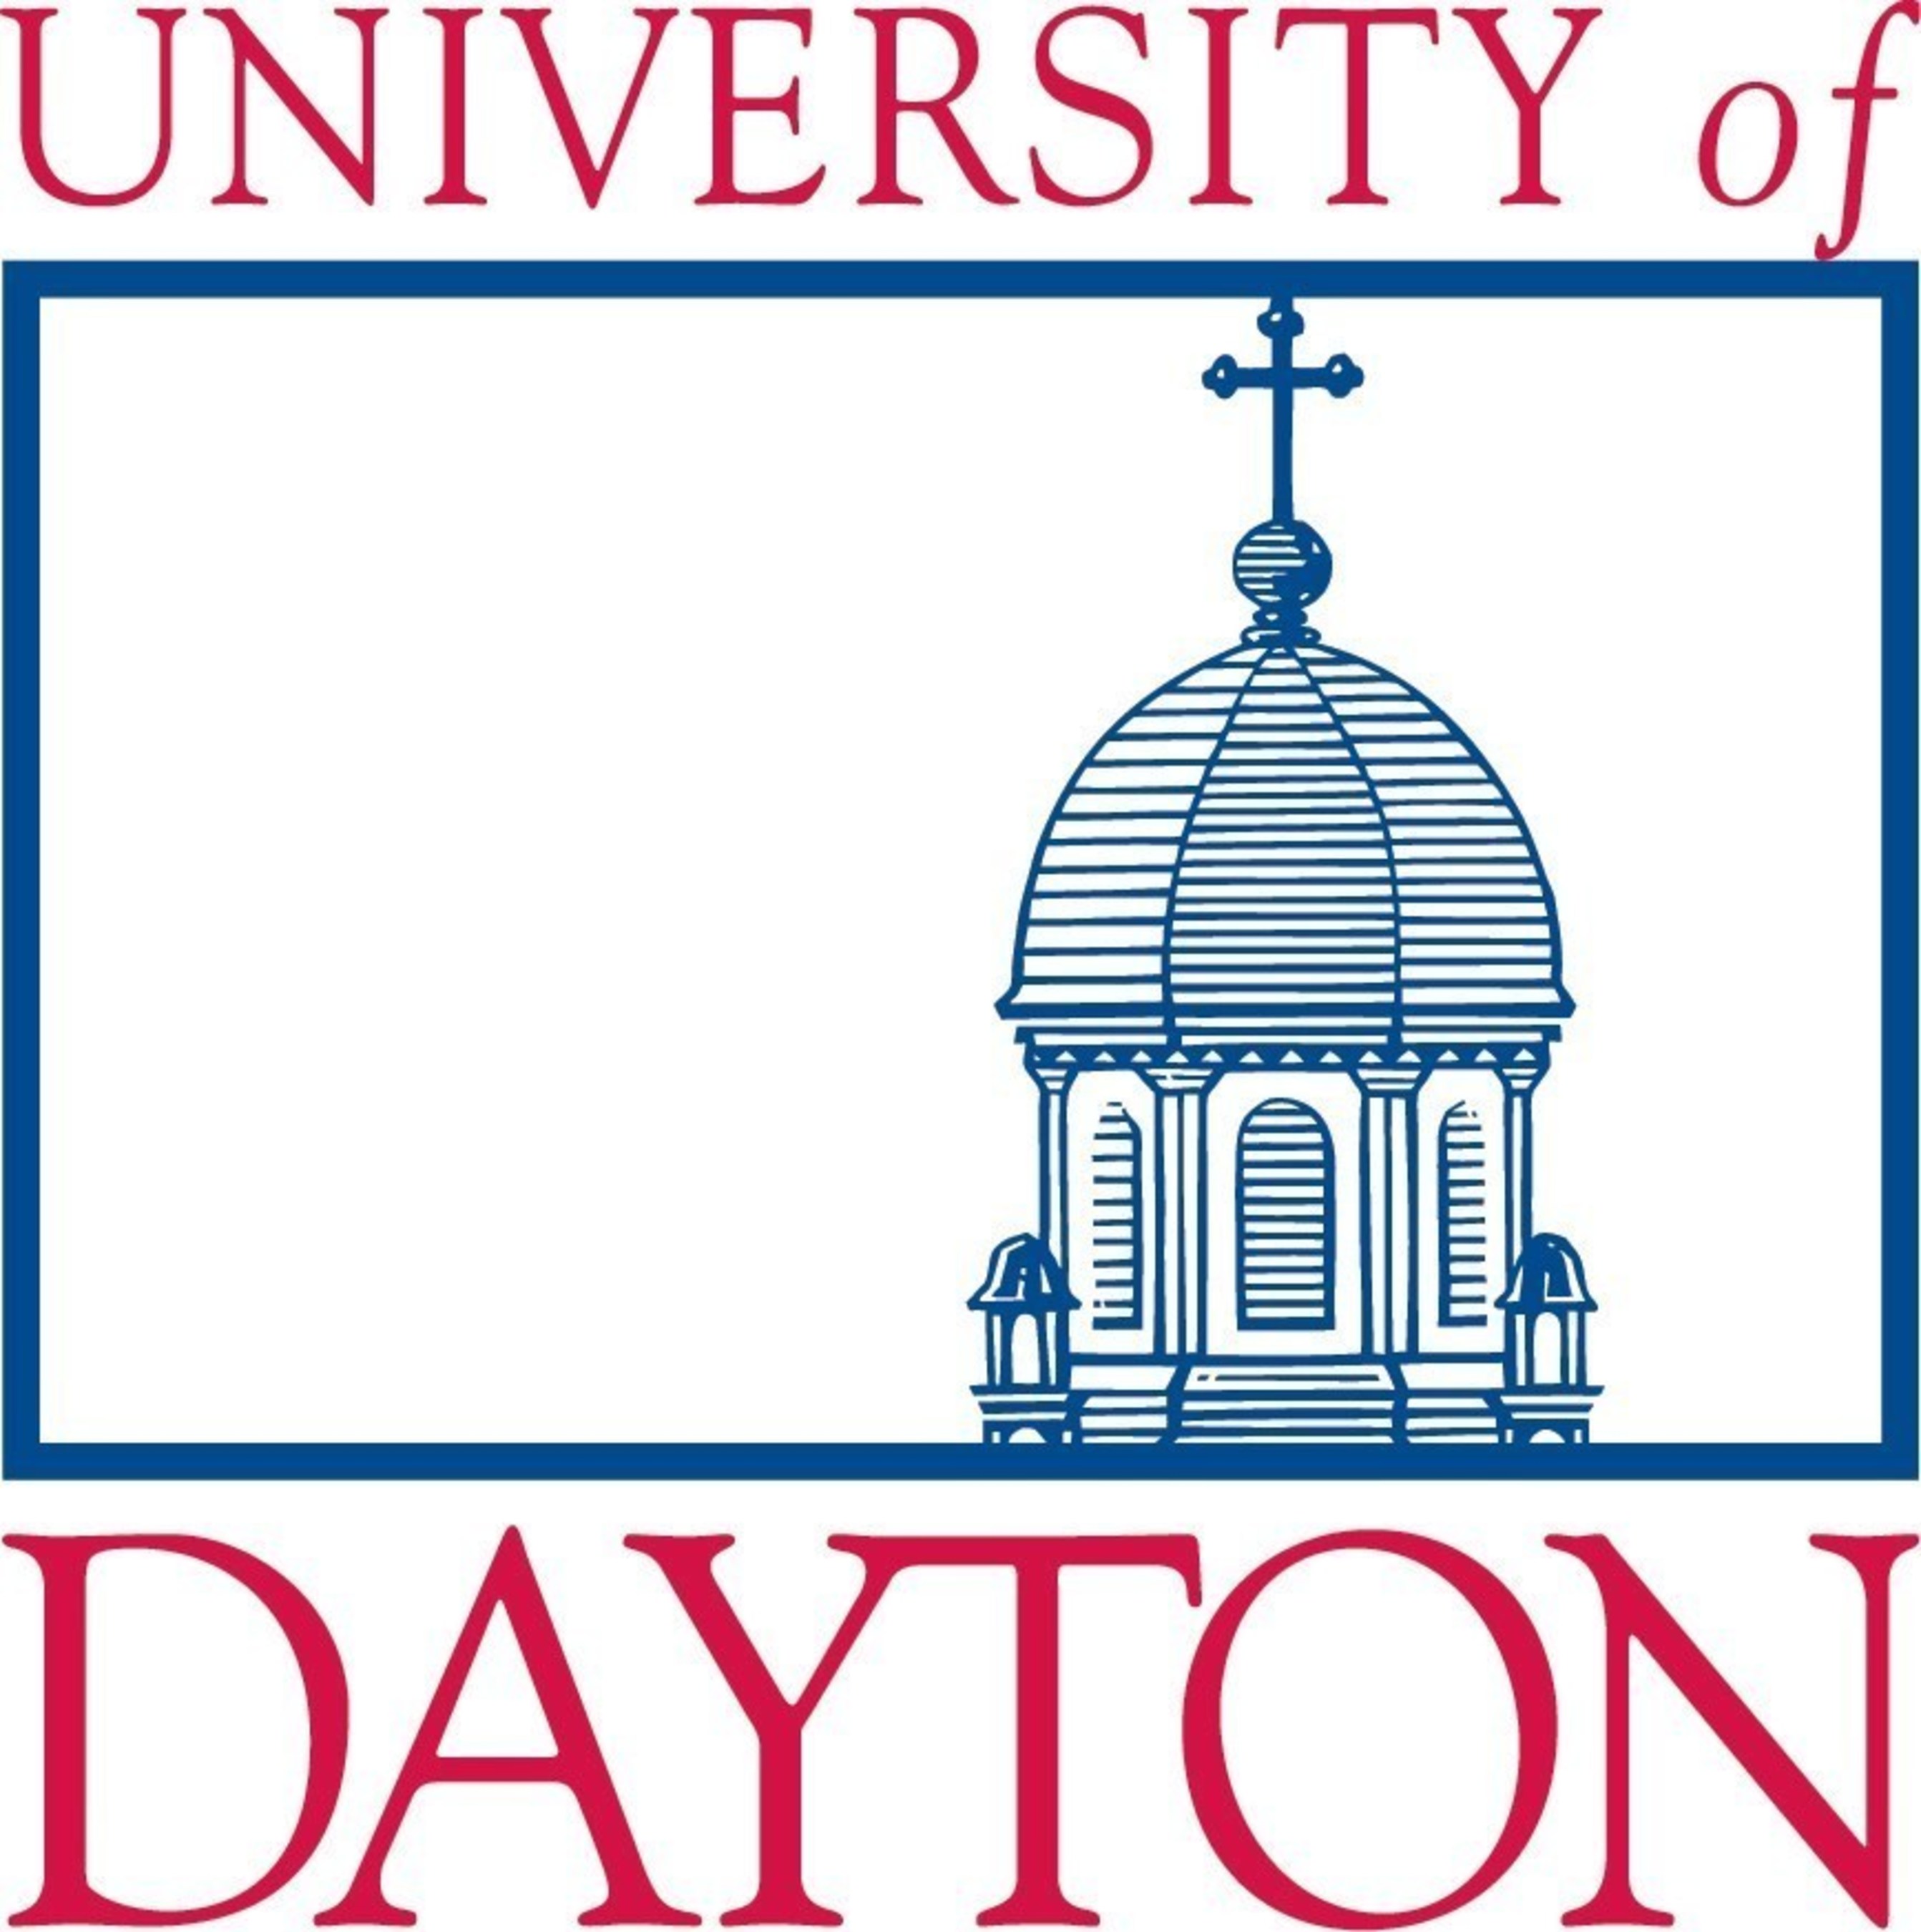 The University of Dayton will host Dayton Peace Accords at 20 commemorations, including a conference where Bill Clinton, founder of the Clinton Foundation and 42nd President of the United States, will be among the current and former world leaders participating